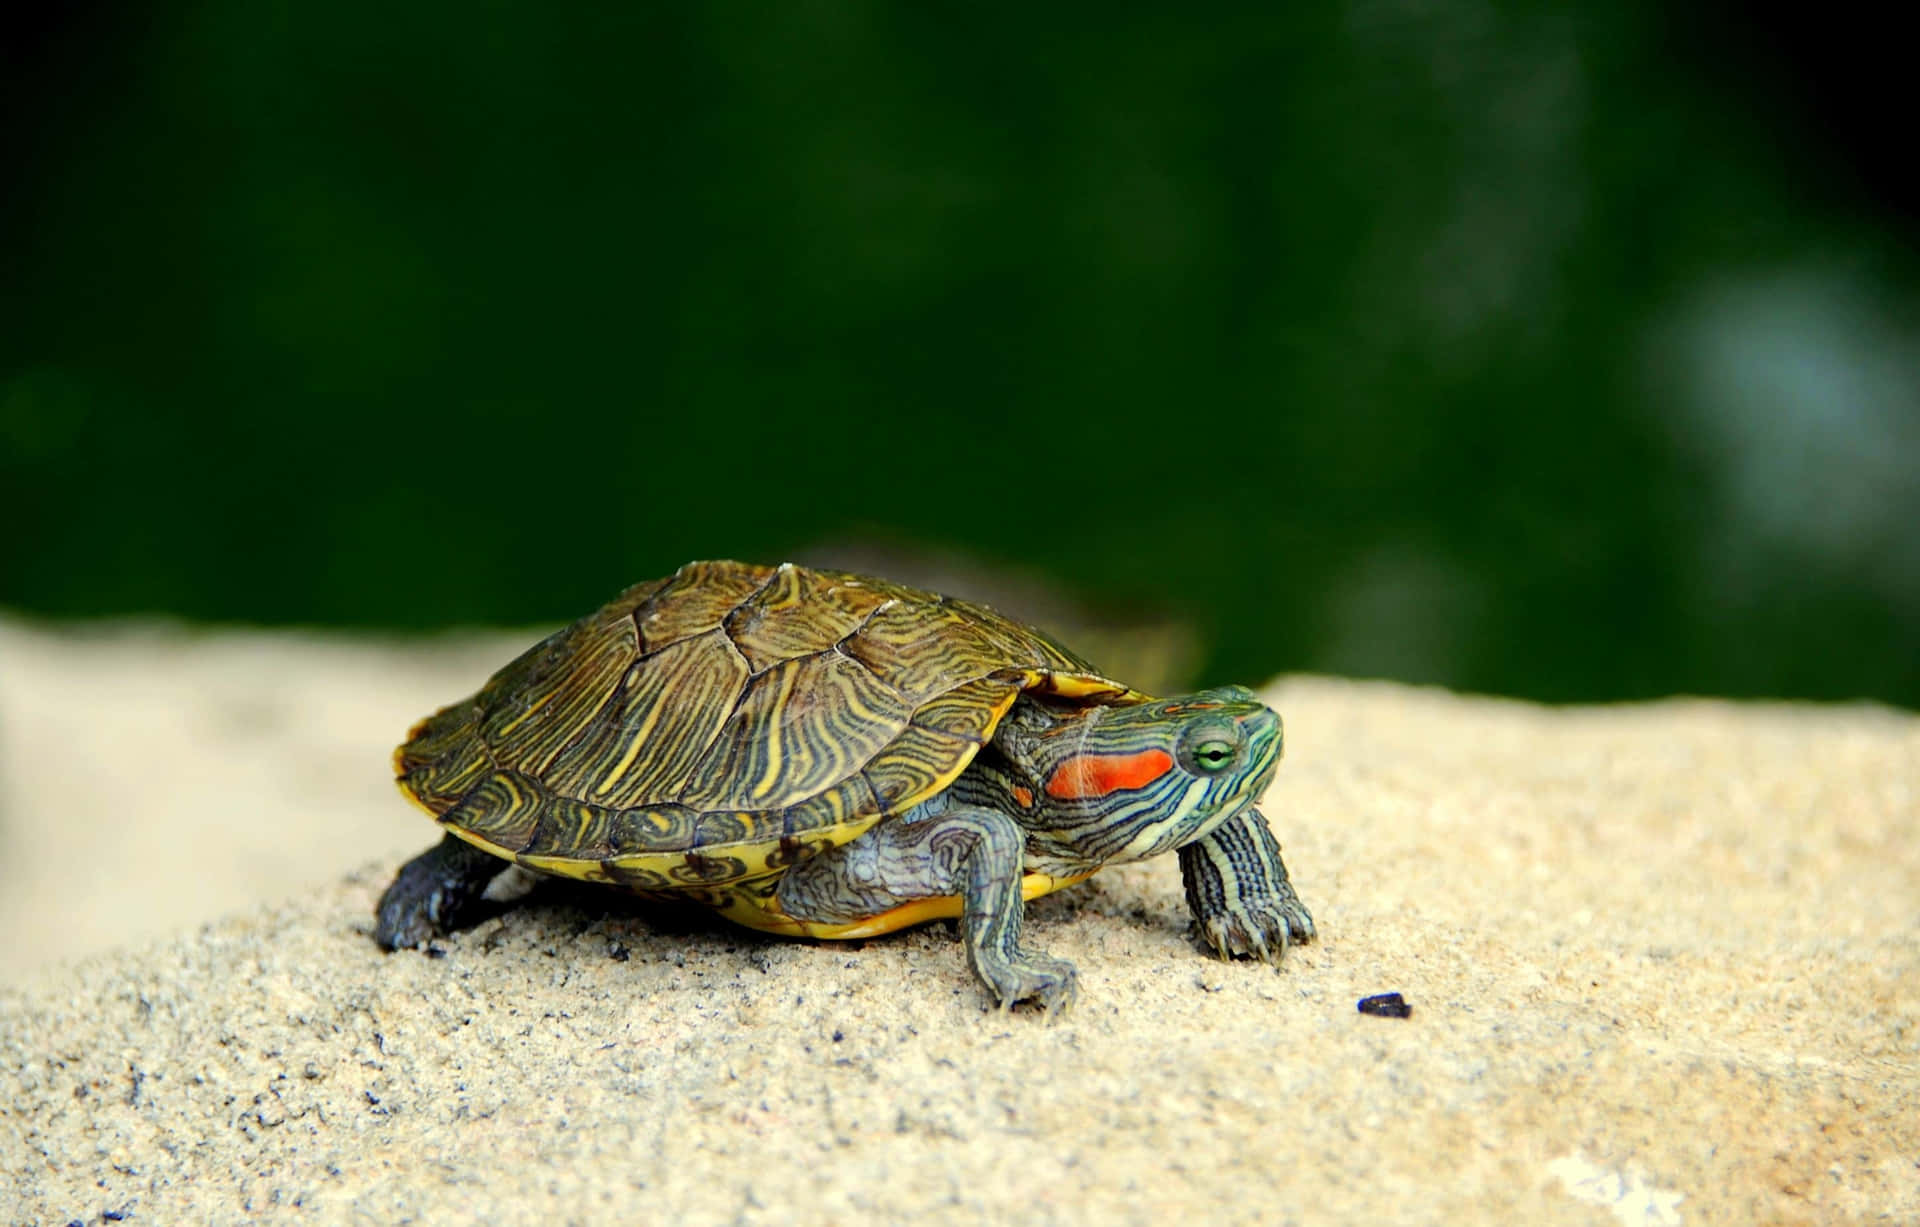 Adorably Cute Turtle